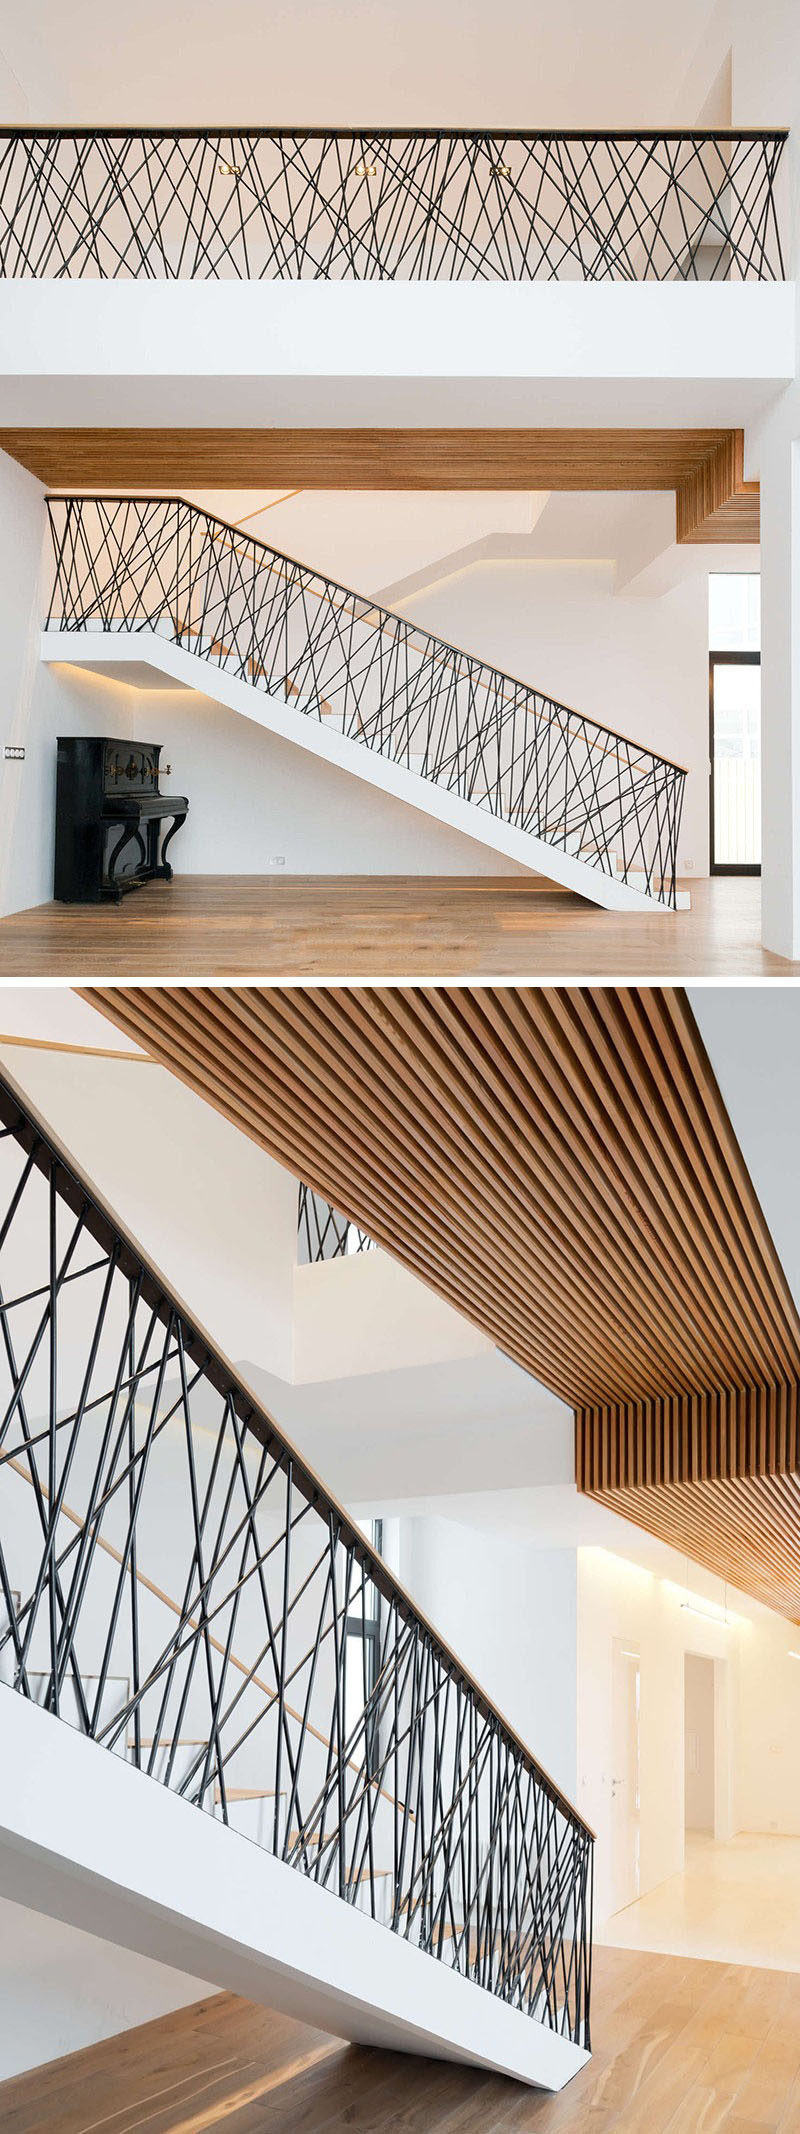 11 Creative Stair Railings That Are A Focal Point In These ...